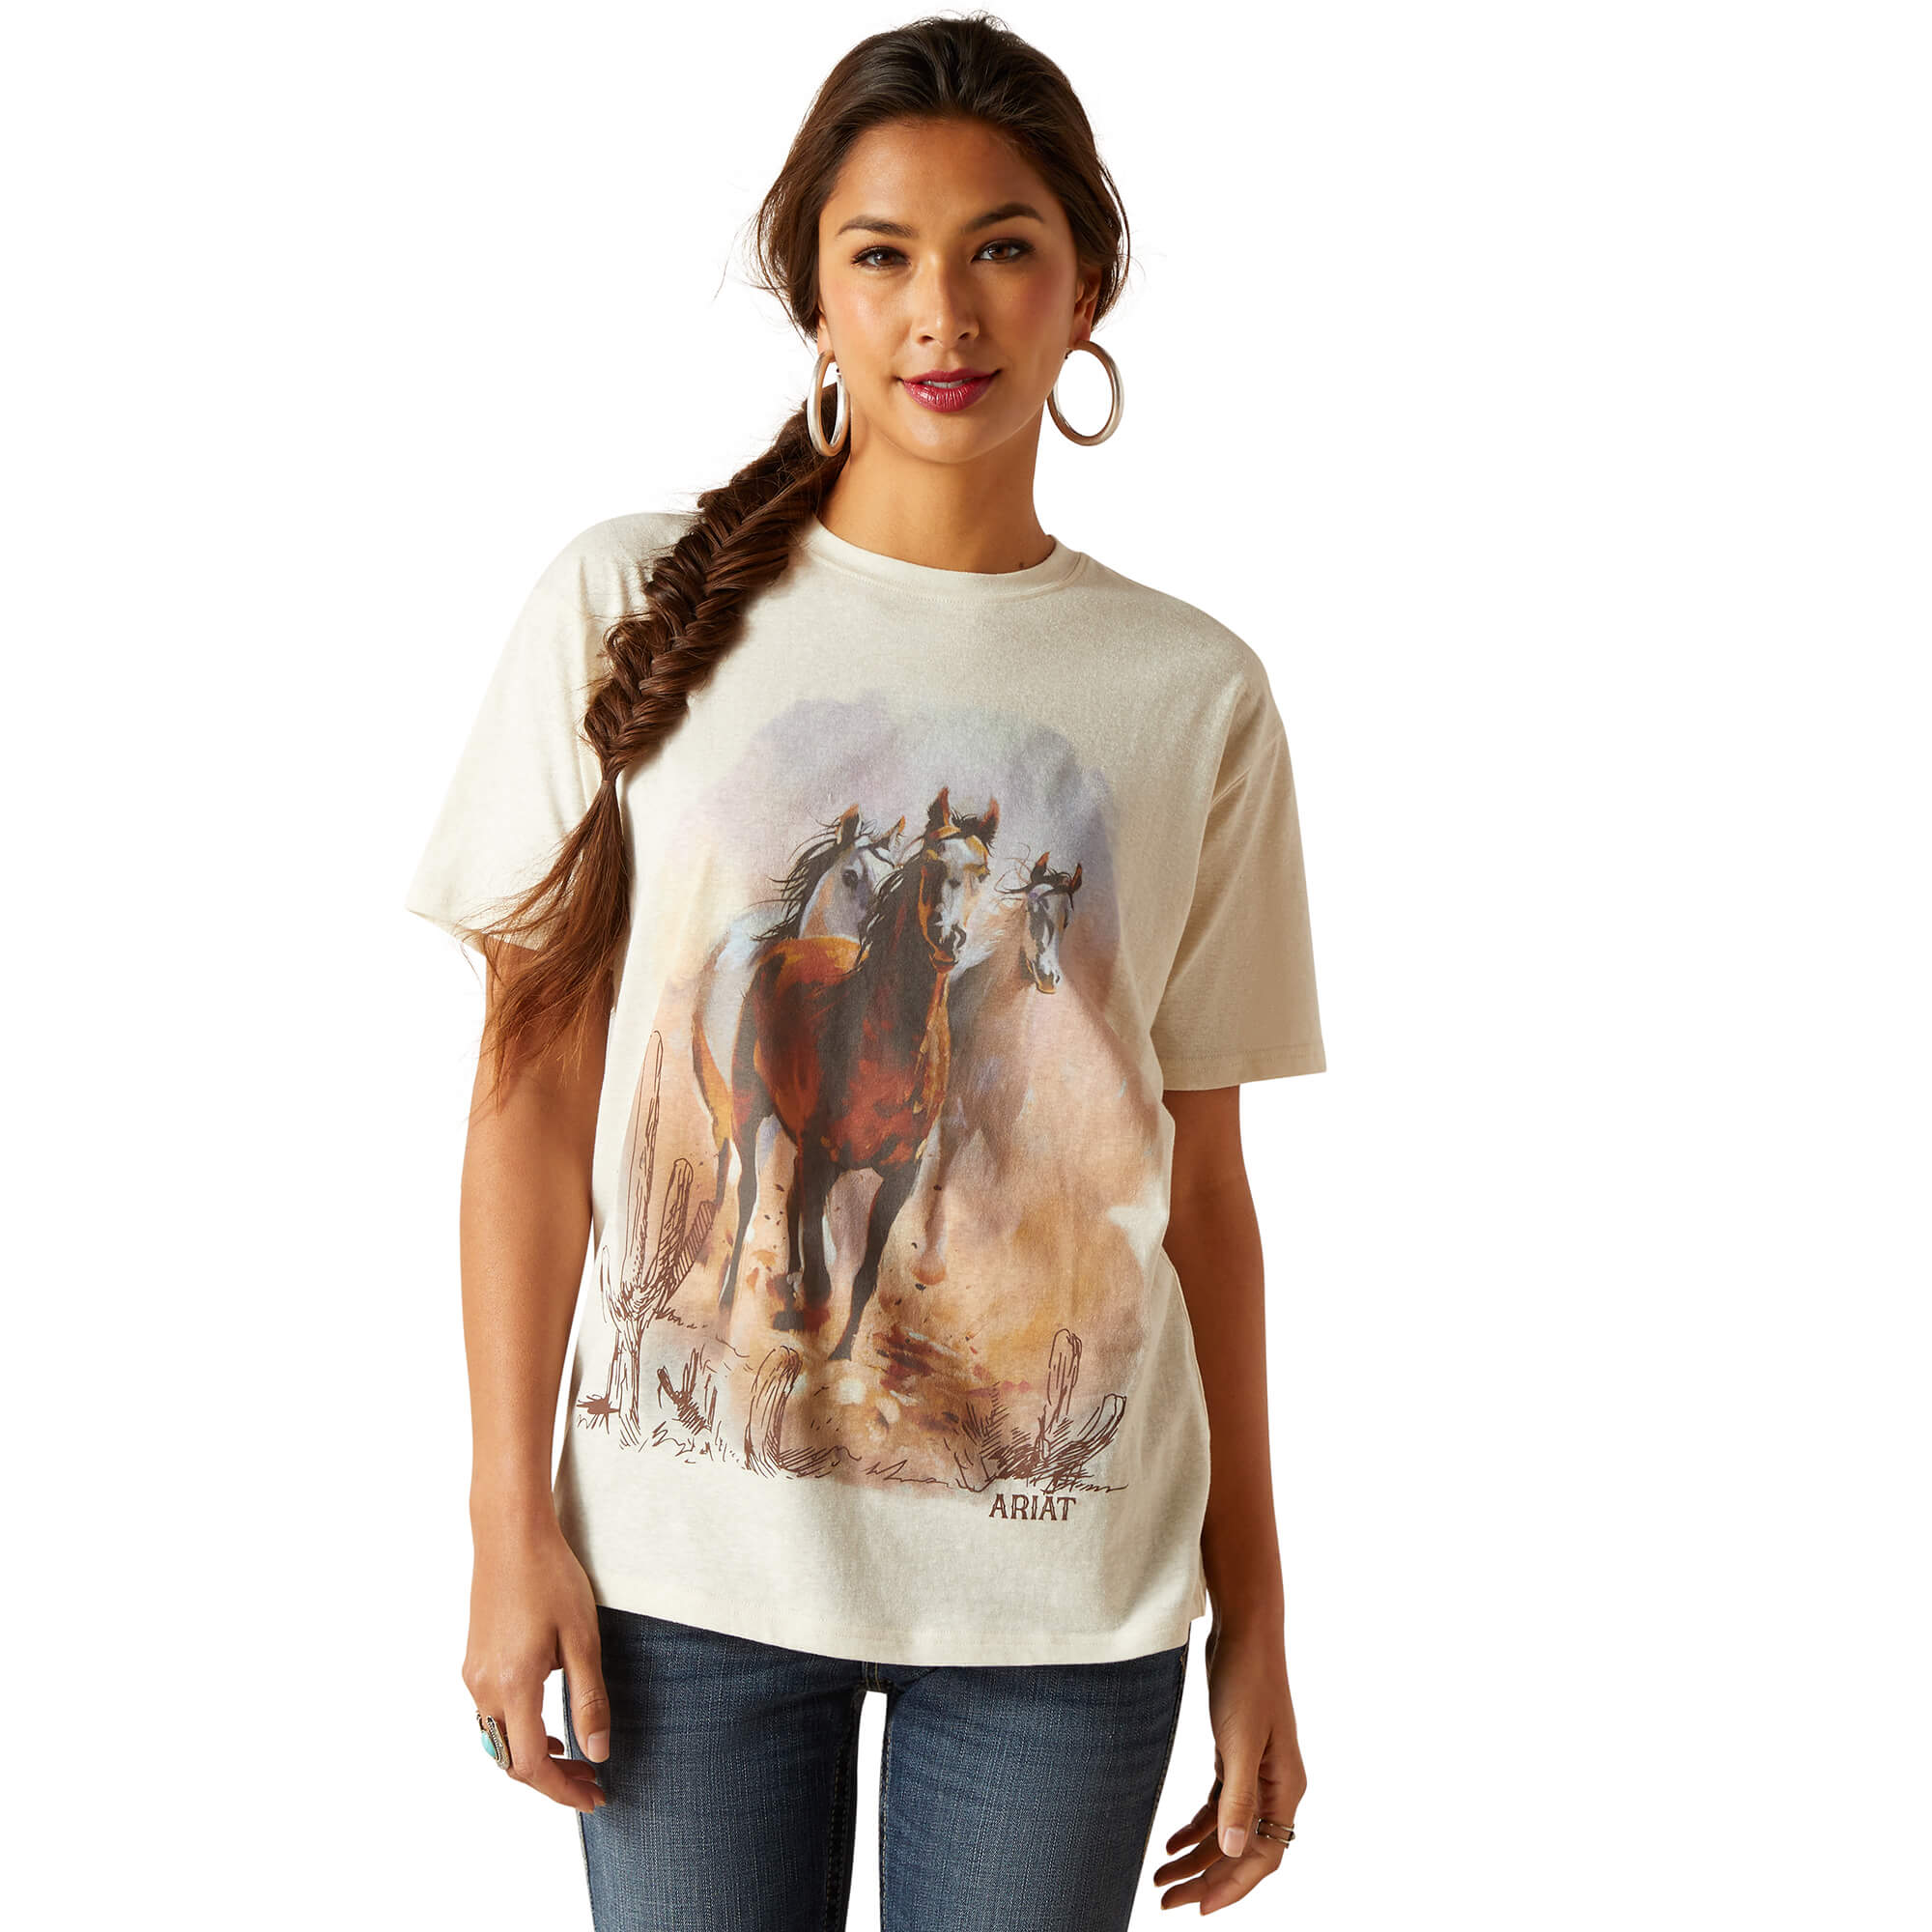 Ariat Set Me Free Tee full front view